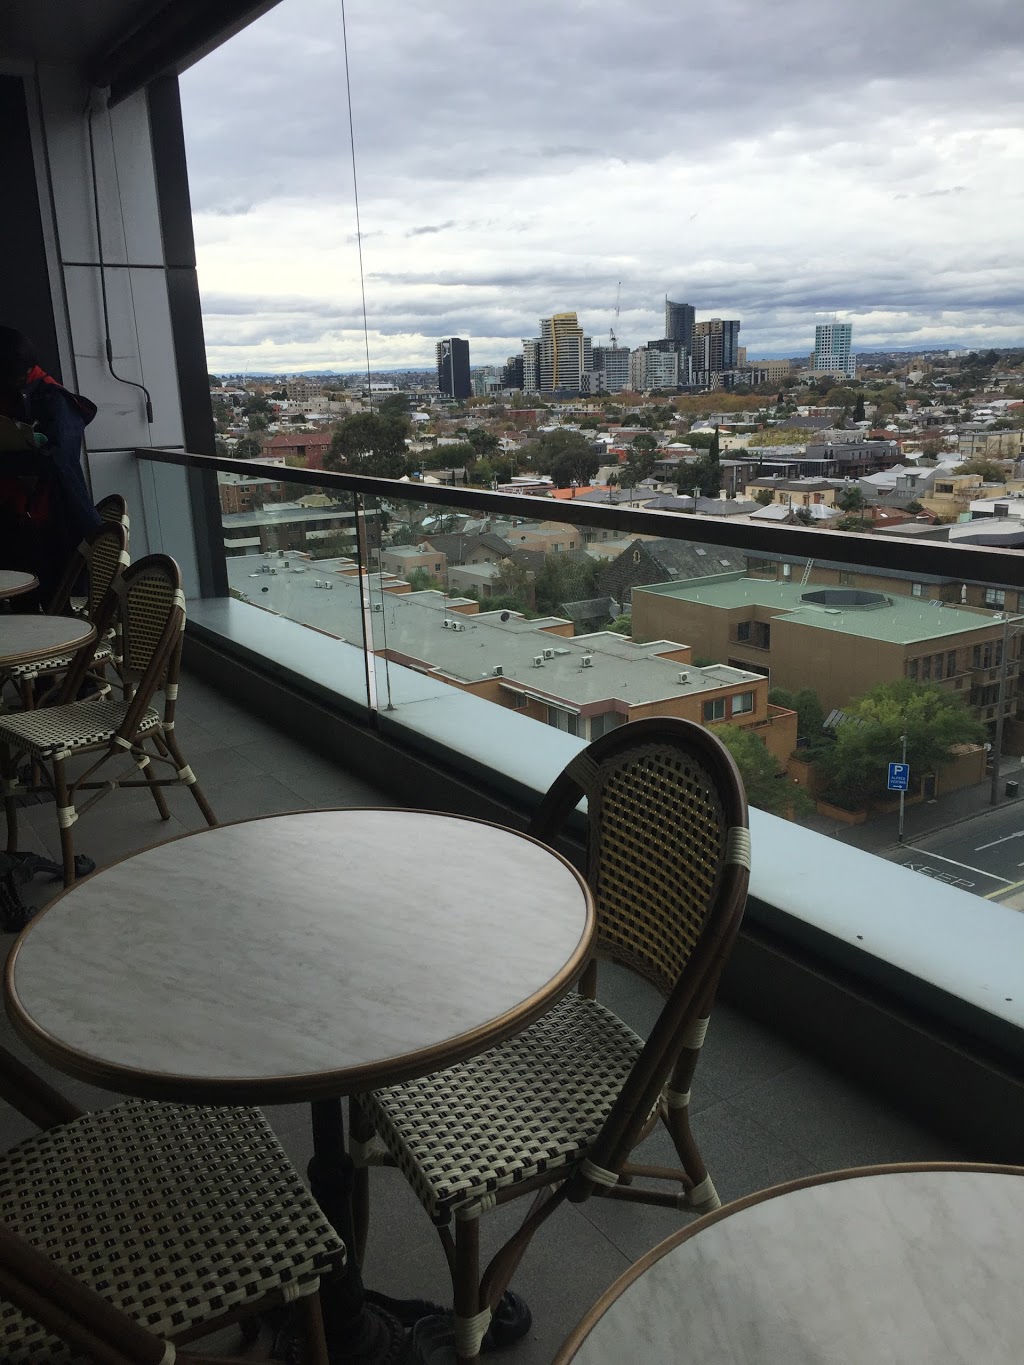 My Serendipity Cafe, Level 7 Baker Institute | 75 Commercial Rd, Melbourne VIC 3004, Australia | Phone: 0420 559 533